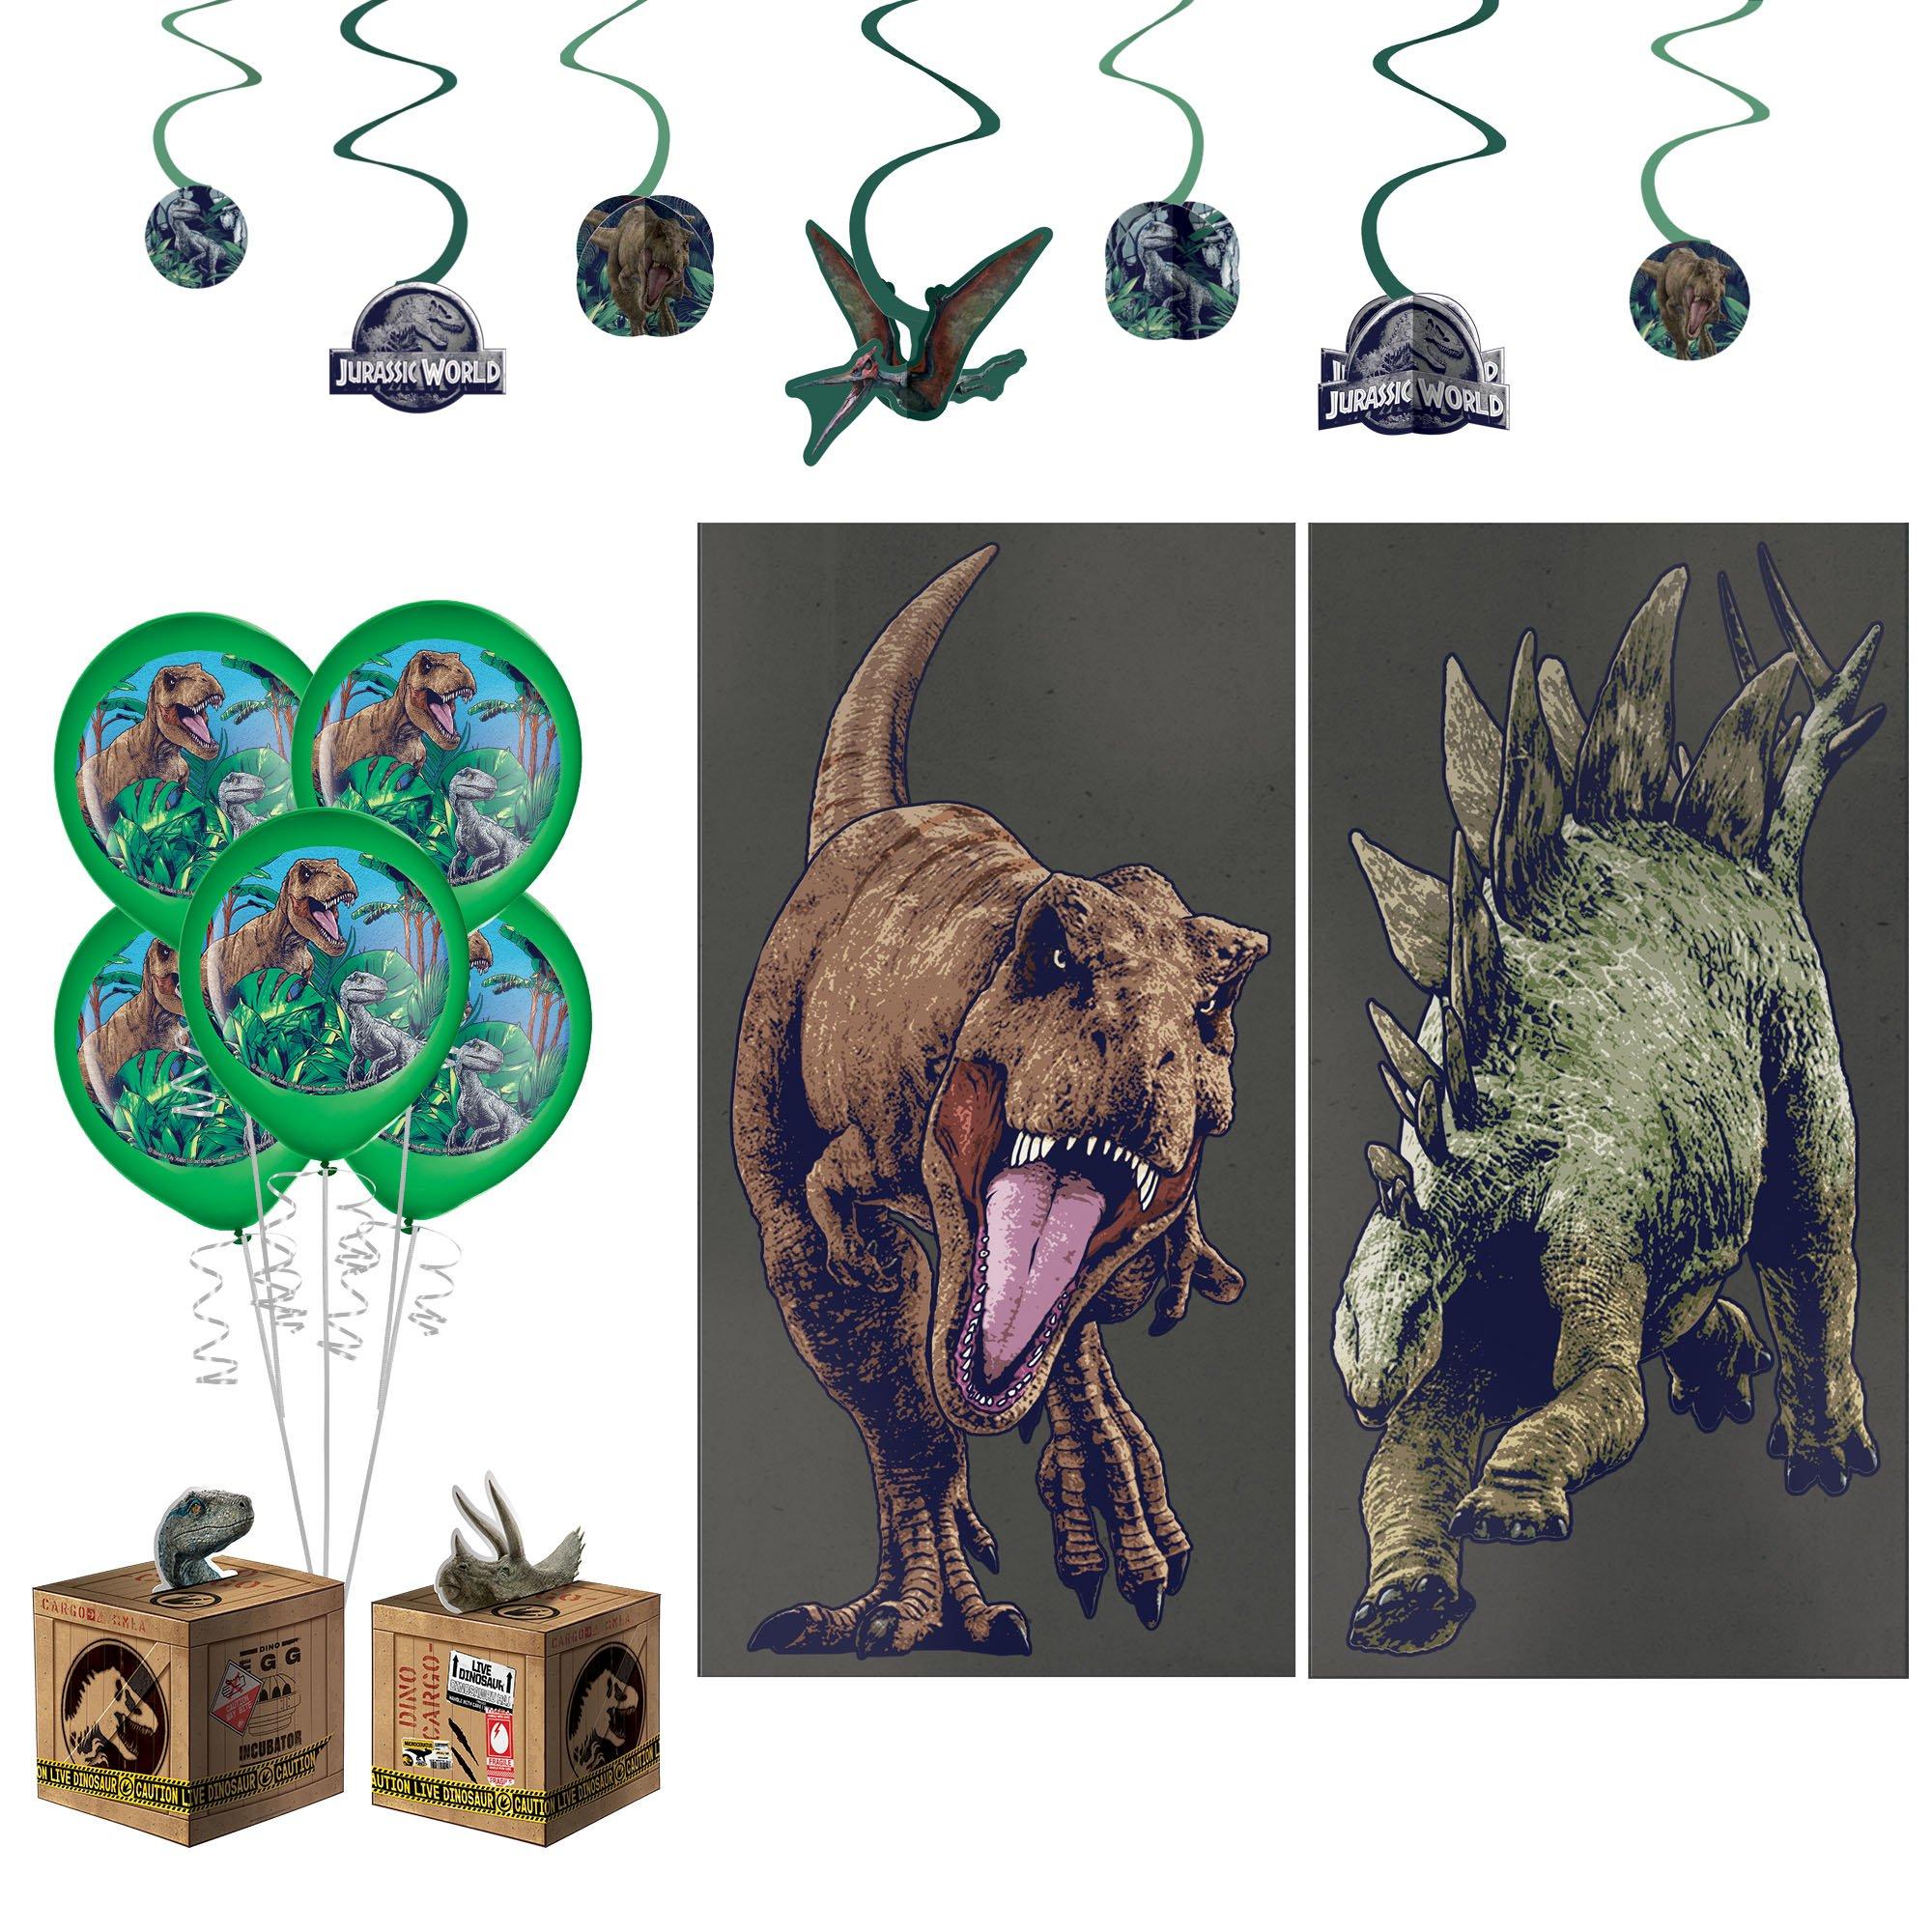 Jurassic World Party Decorating Supplies Pack - Kit Includes Centerpieces, Themed Latex Balloons, Scene Setter & Swirl Decorations